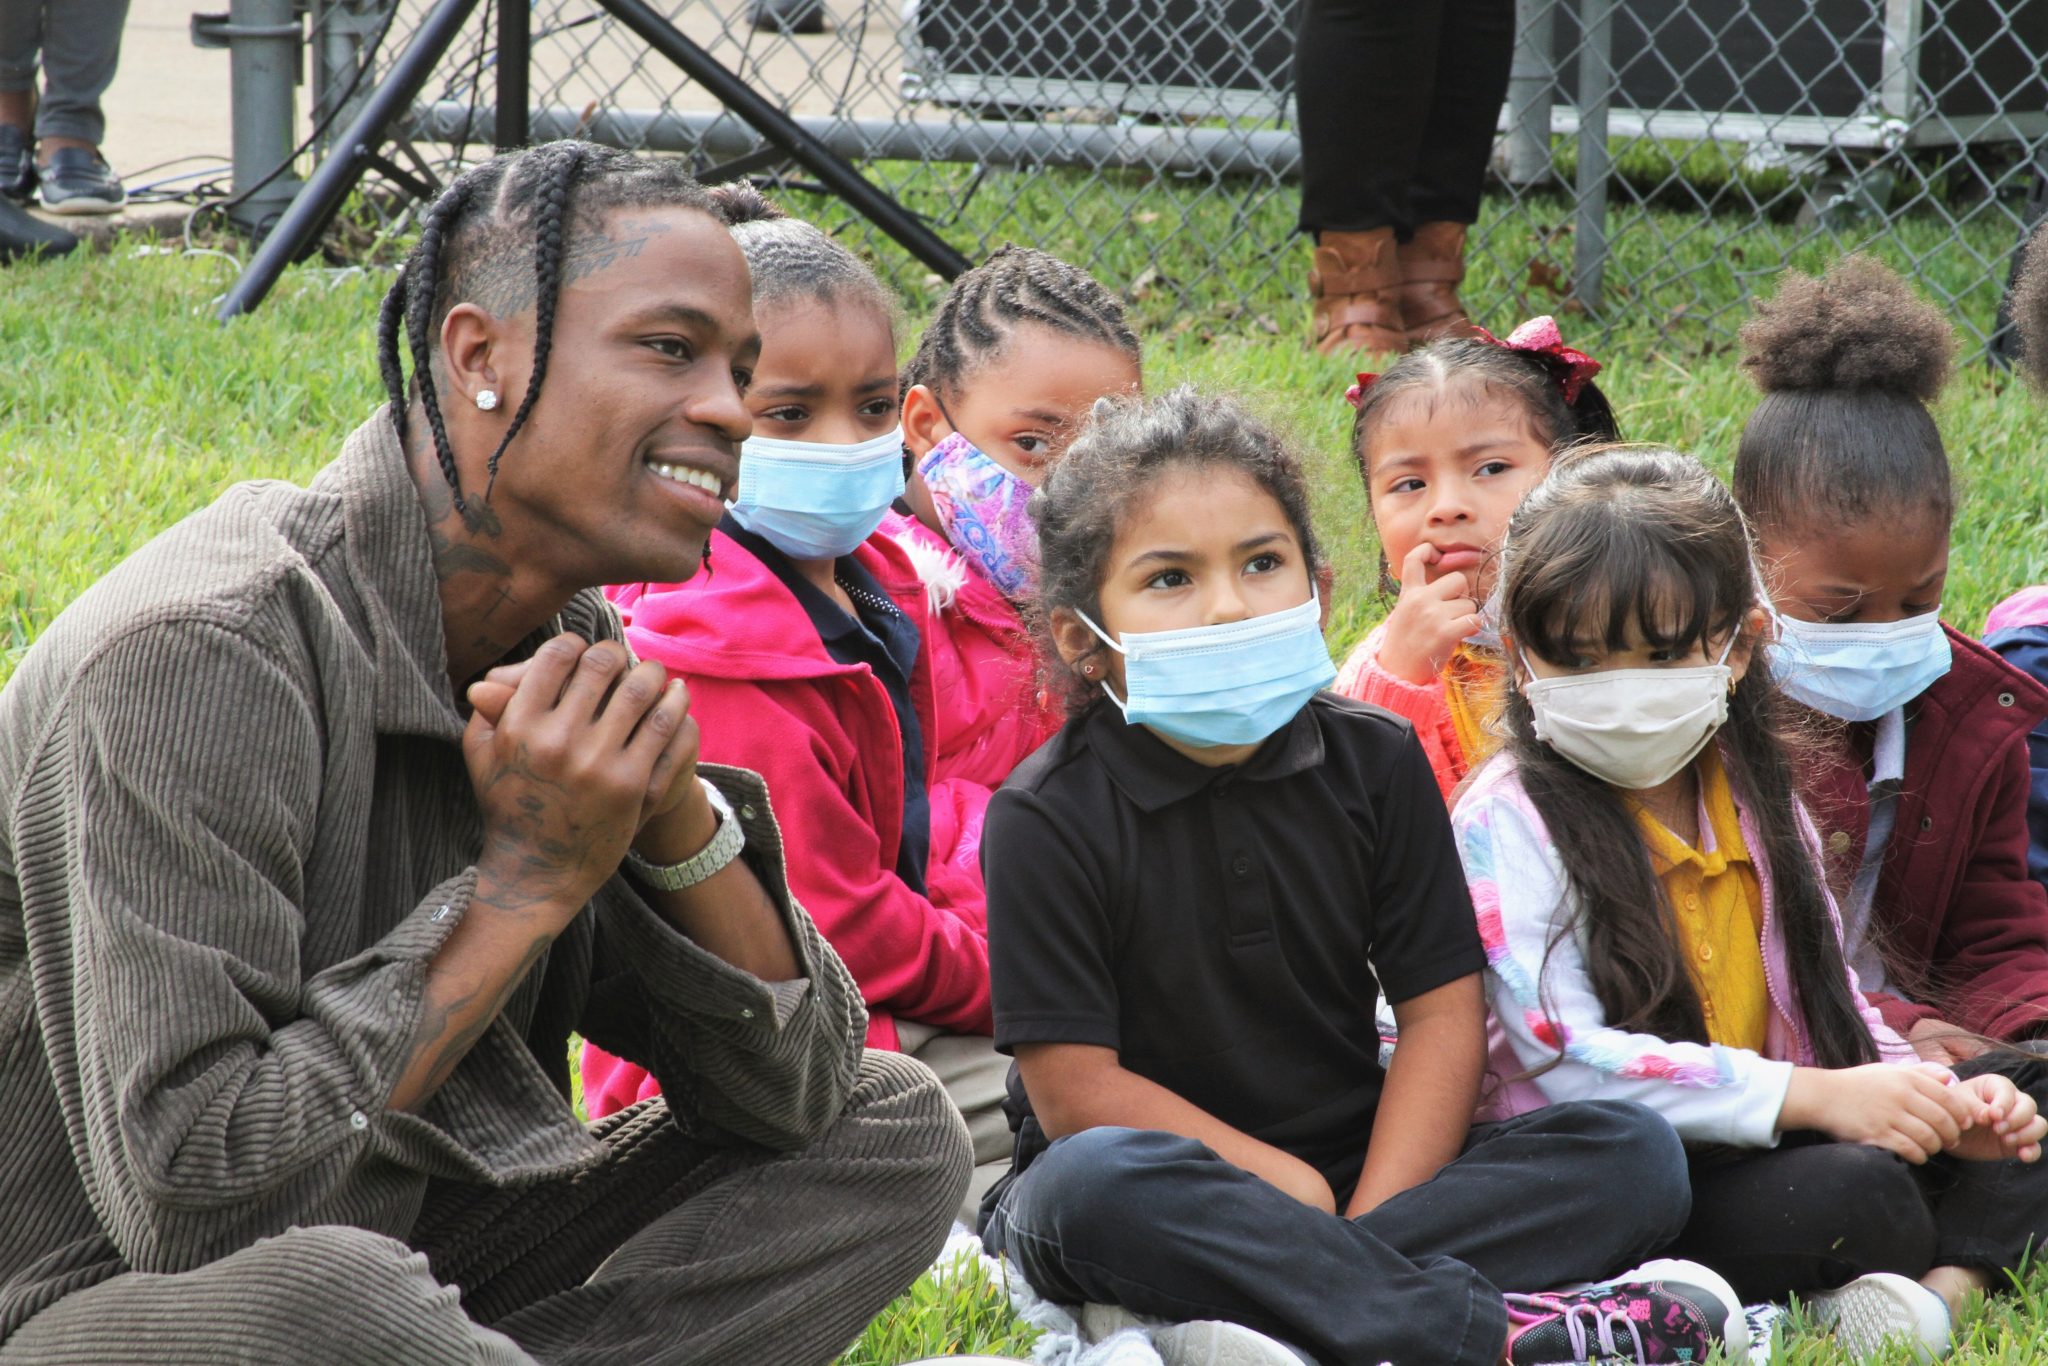 Rapper Travis Scott and Houston ISD are teaming up to bring gardens to schools across the city